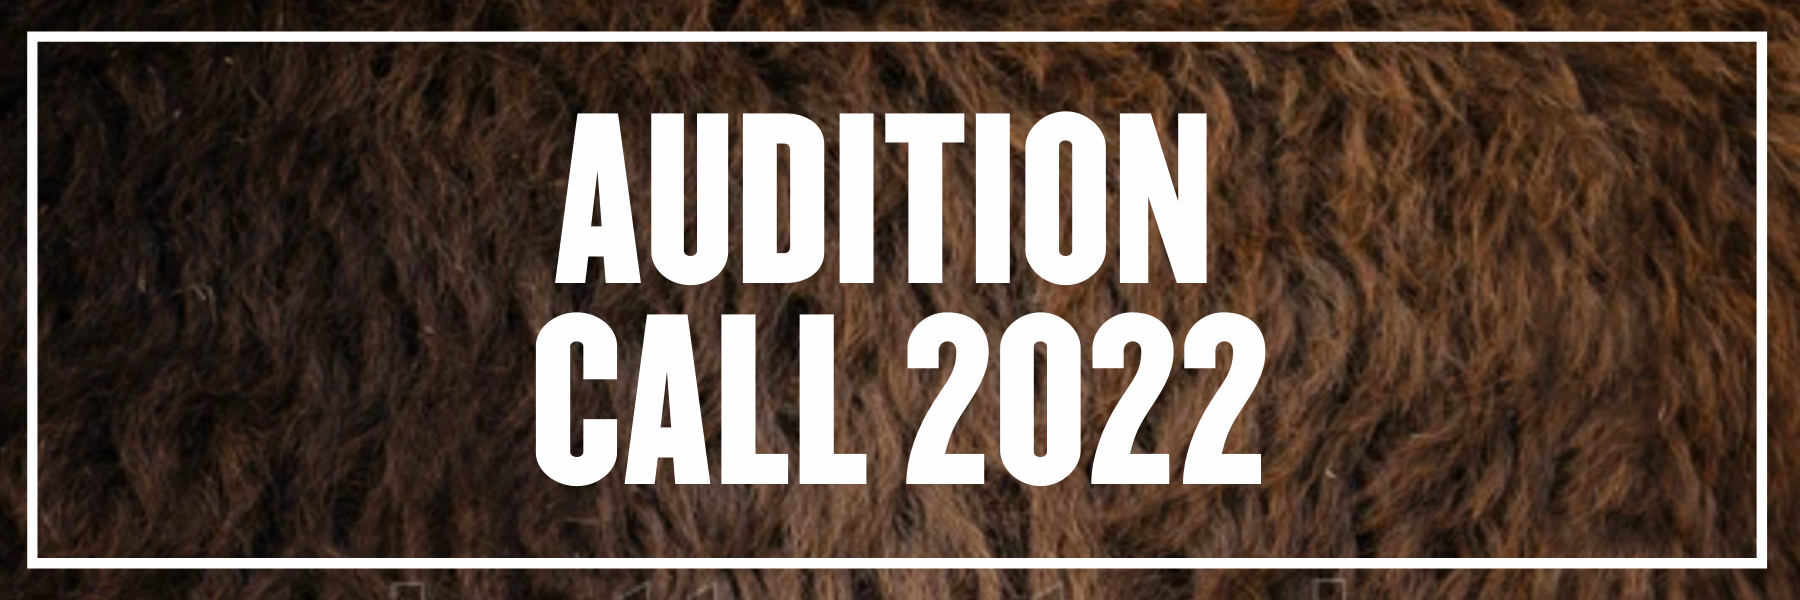 Audition Call 2022